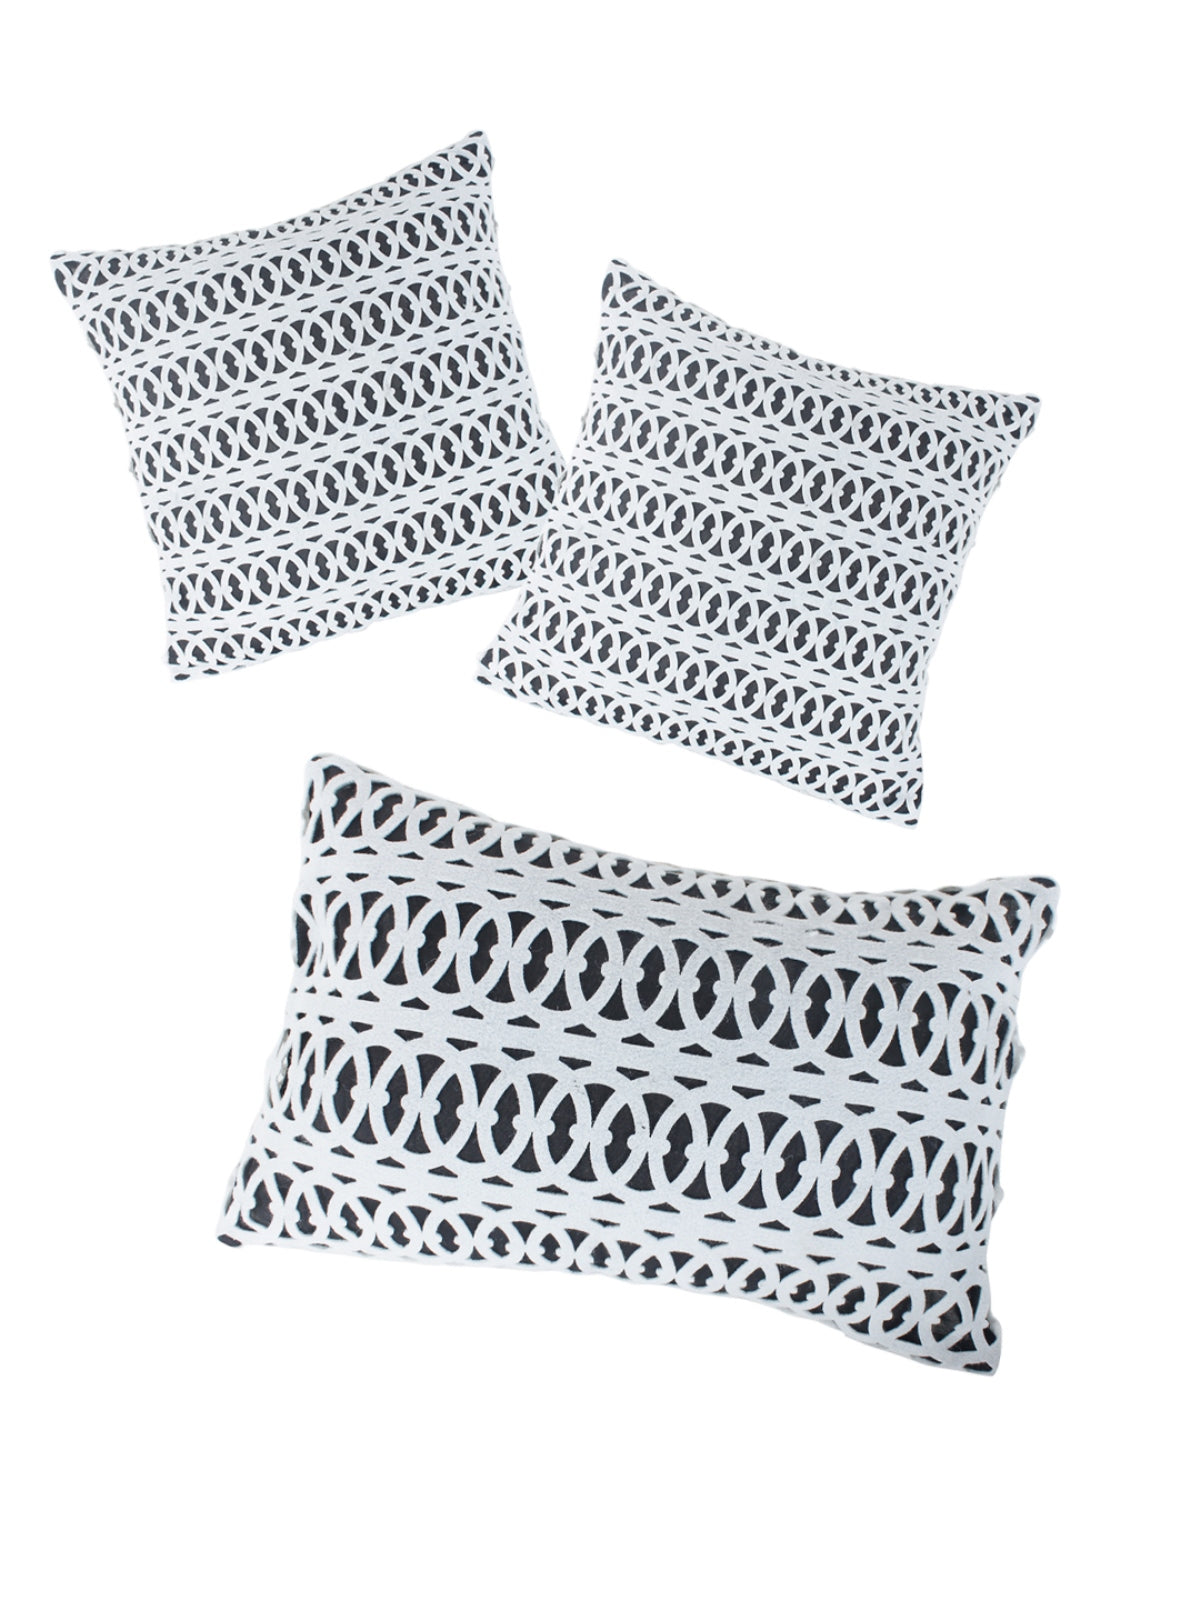 Black & White Set of 3 Polyester (16 x 16) Inch, (12 x 18) Inch Cushion Covers